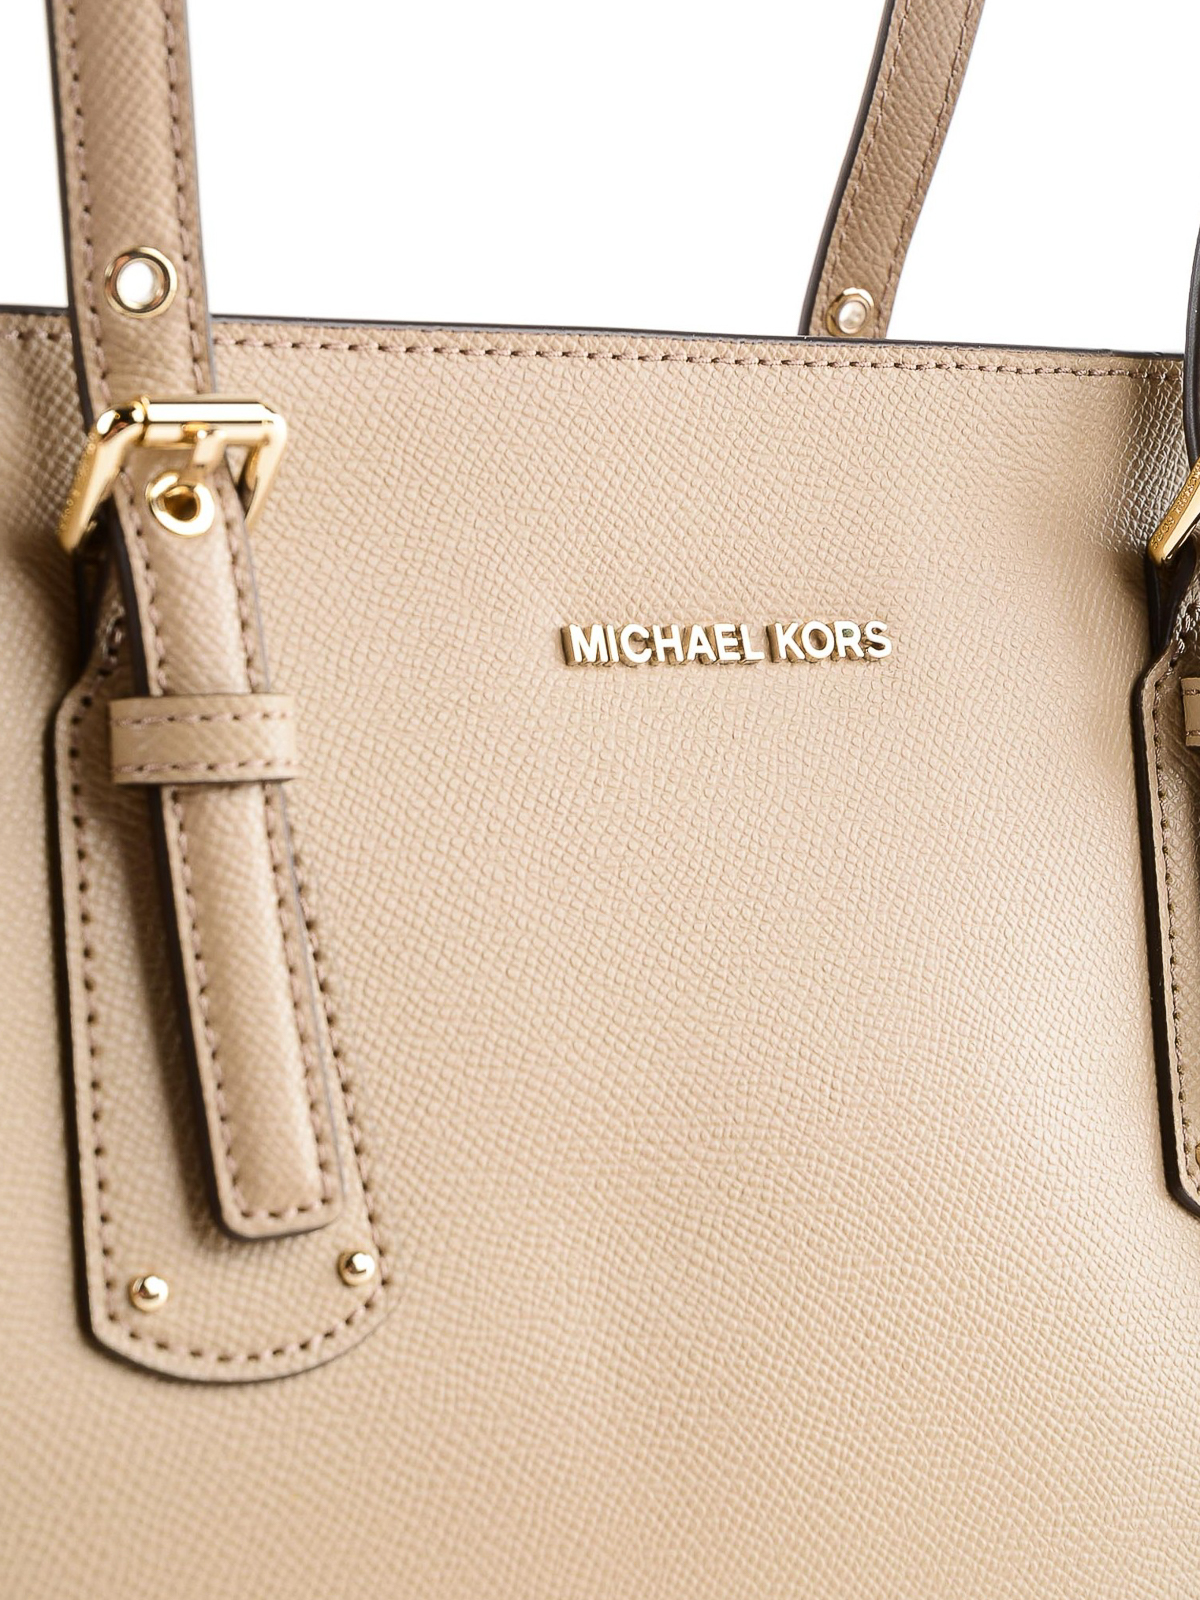 Totes bags Michael Kors - Voyager medium beige leather tote - 30T8TV6T8L208